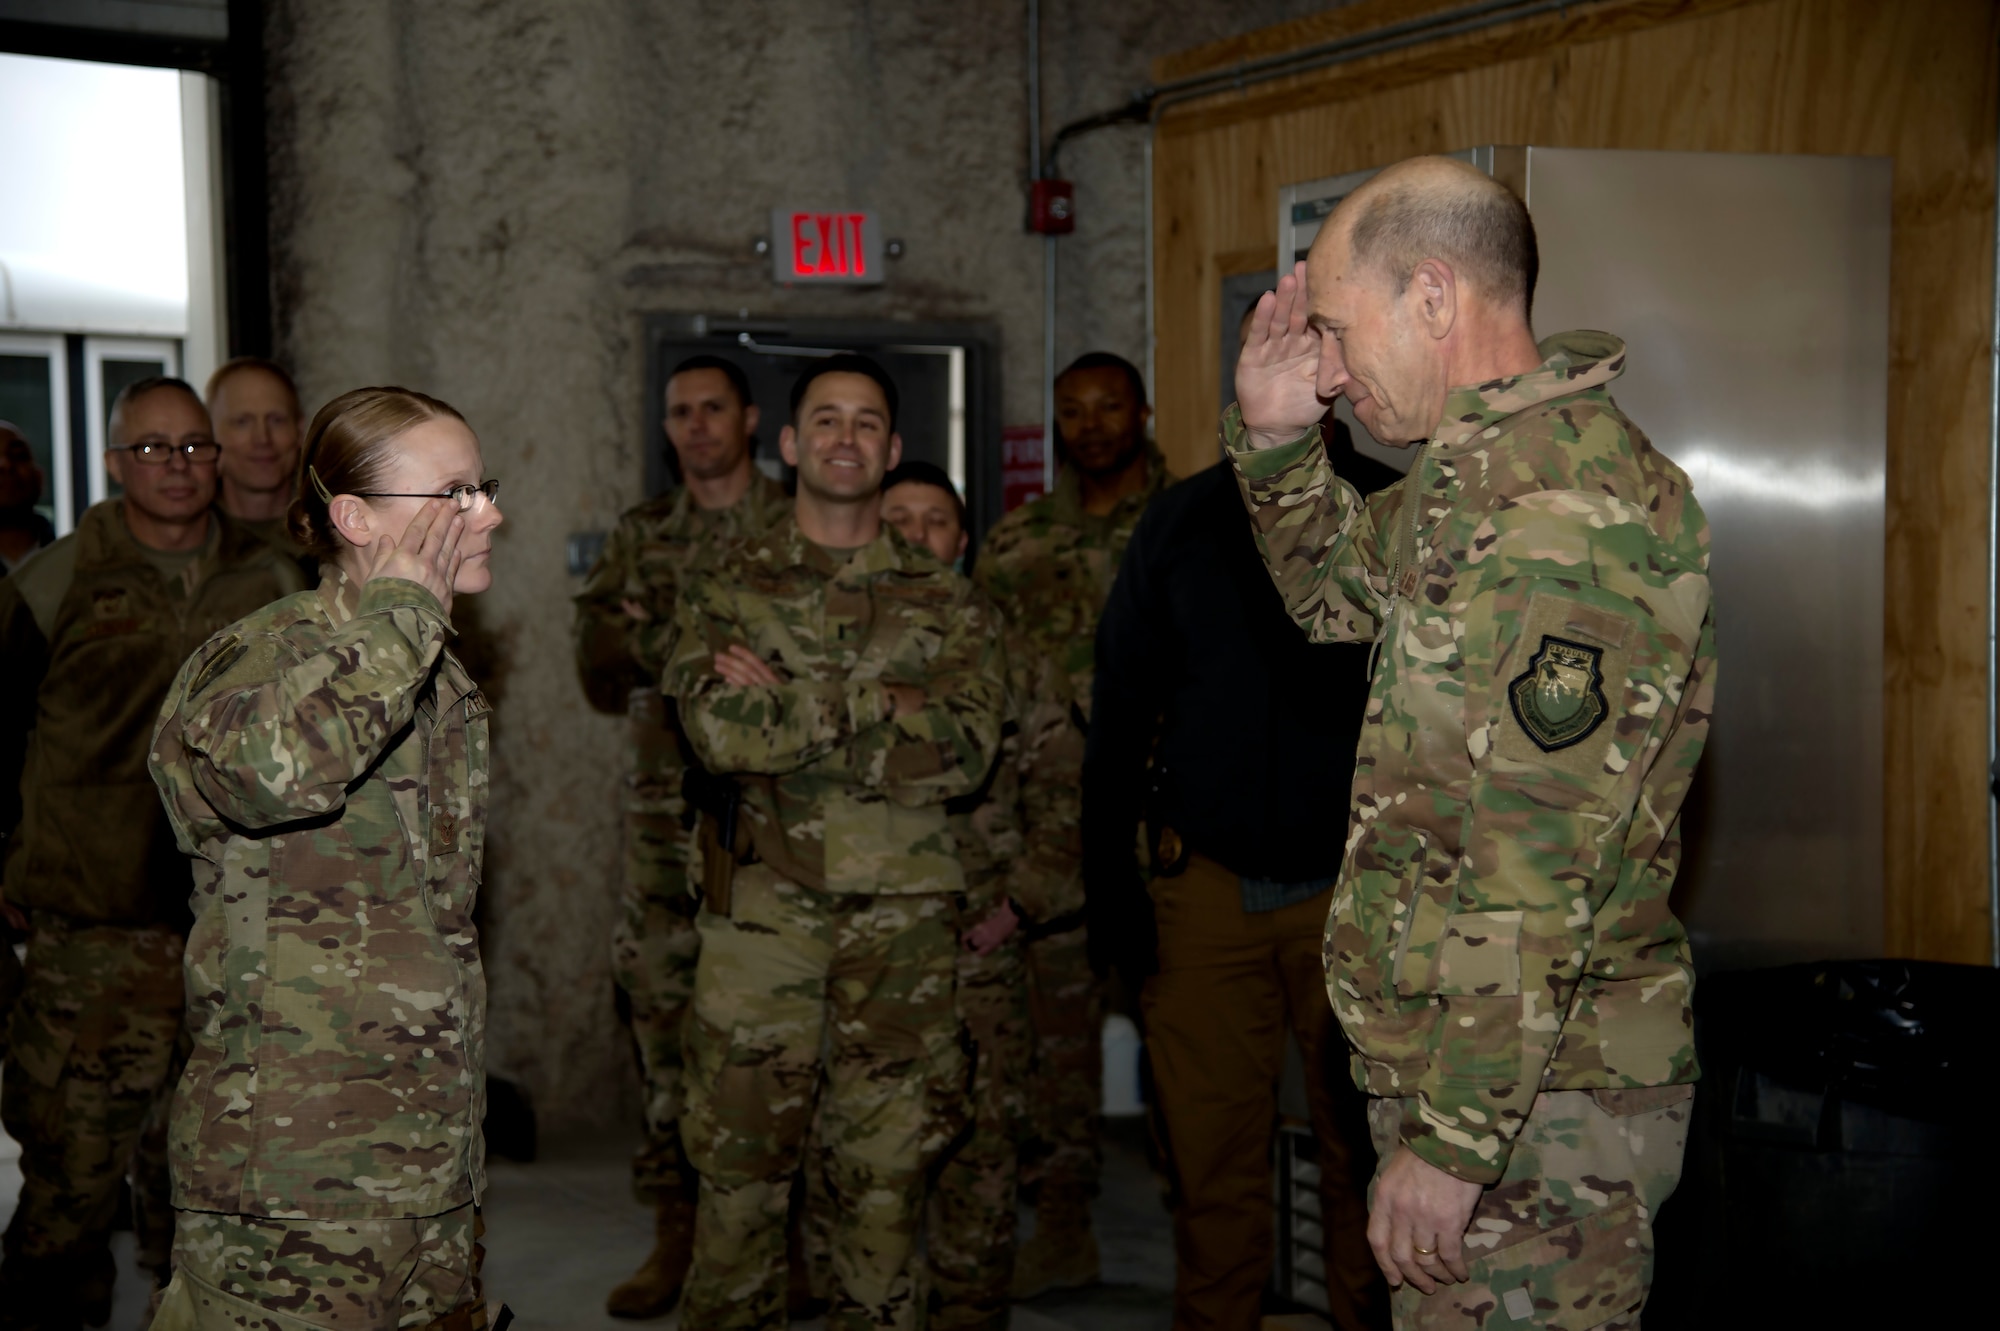 An Airman from the 455th Expeditionary Communications Squadron salutes Gen. Mike Holmes, commander of Air Combat Command,  after receiving his coin for excellence at Bagram Airfield, Afghanistan, Feb. 12, 2019.